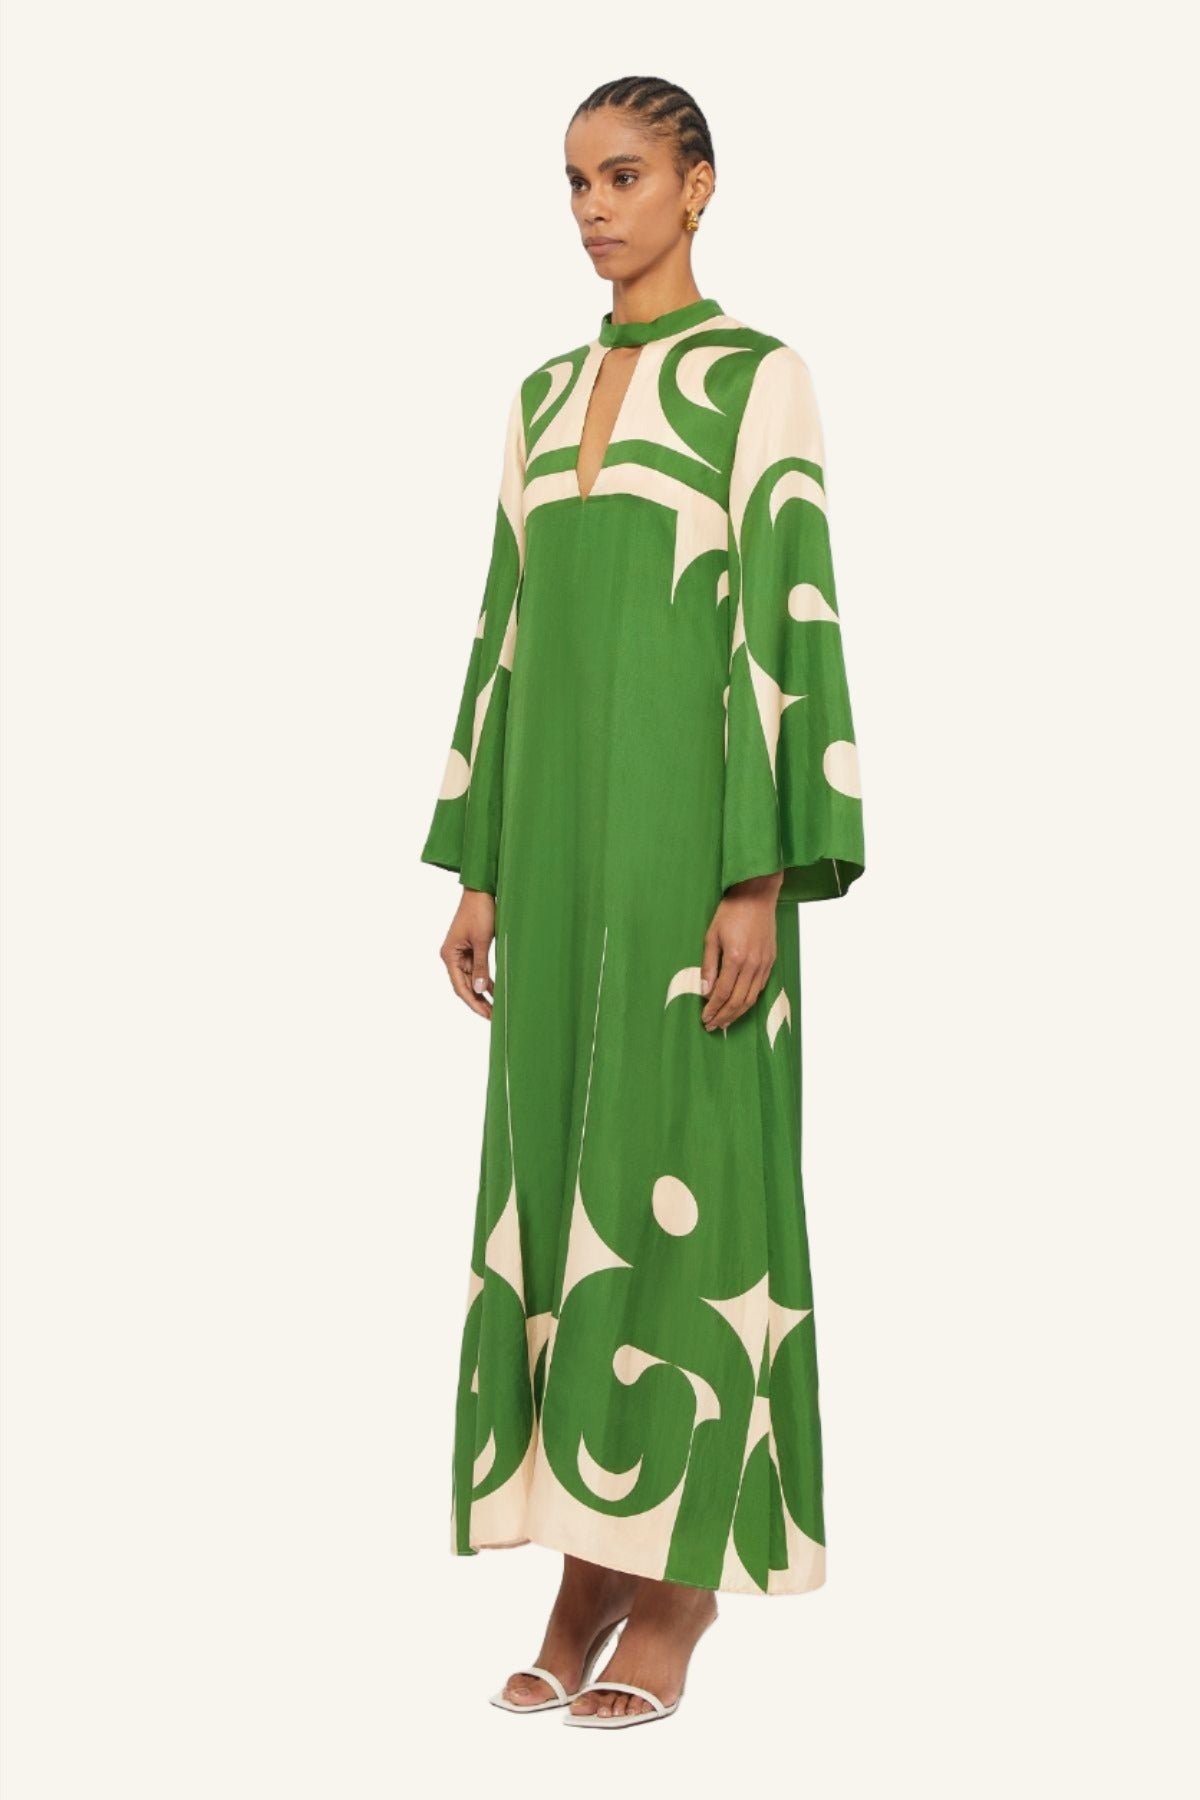 Emerald Green & Cream deco printed long silk gown crafted by Australian fashion designer GINGER & SMART